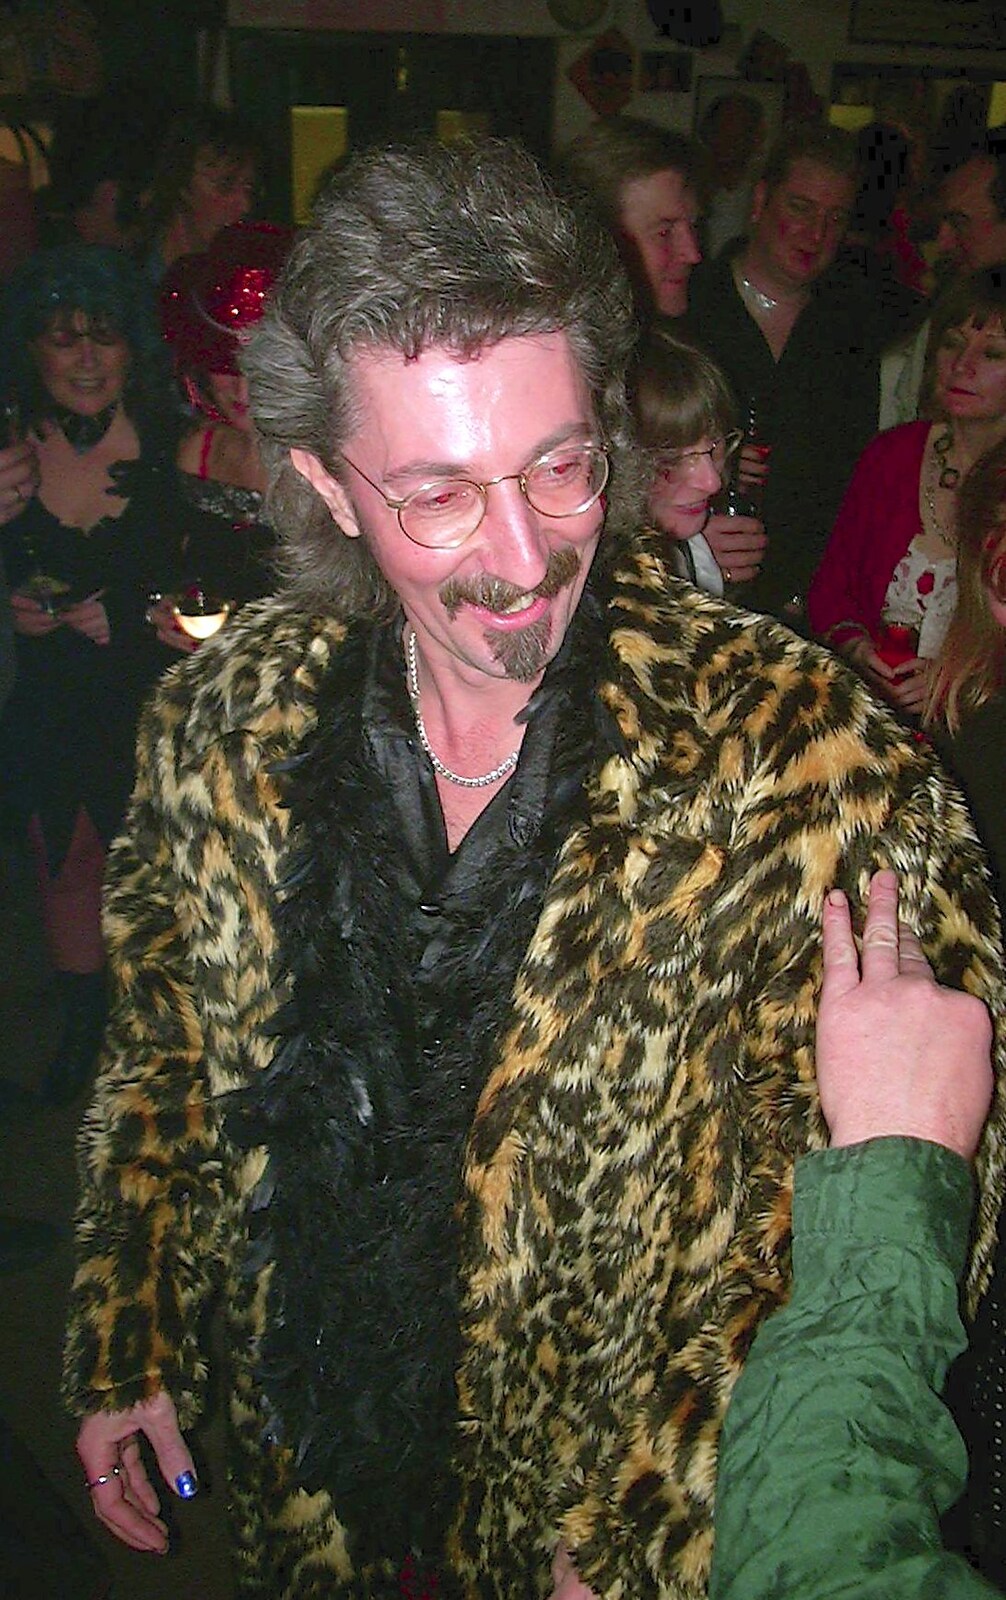 Rob's faux-fur coat is inspected from The BBs do New Year's Eve at The Cider Shed, Banham, Norfolk - 31st December 2003